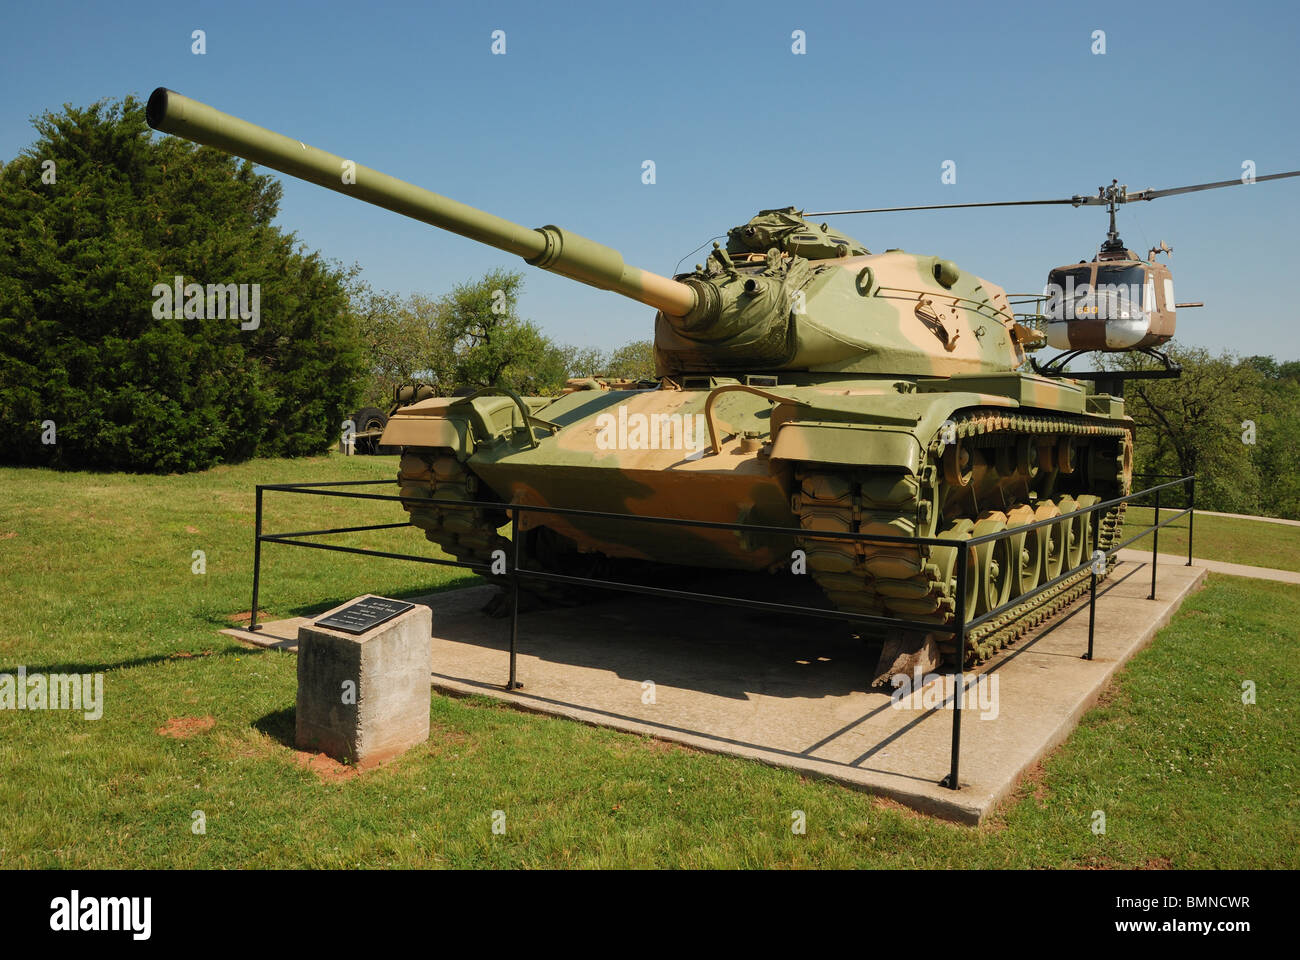 A M-60A main battle tank on display at the 45th Infantry Division Museum, Oklahoma City, Oklahoma, USA. Stock Photo